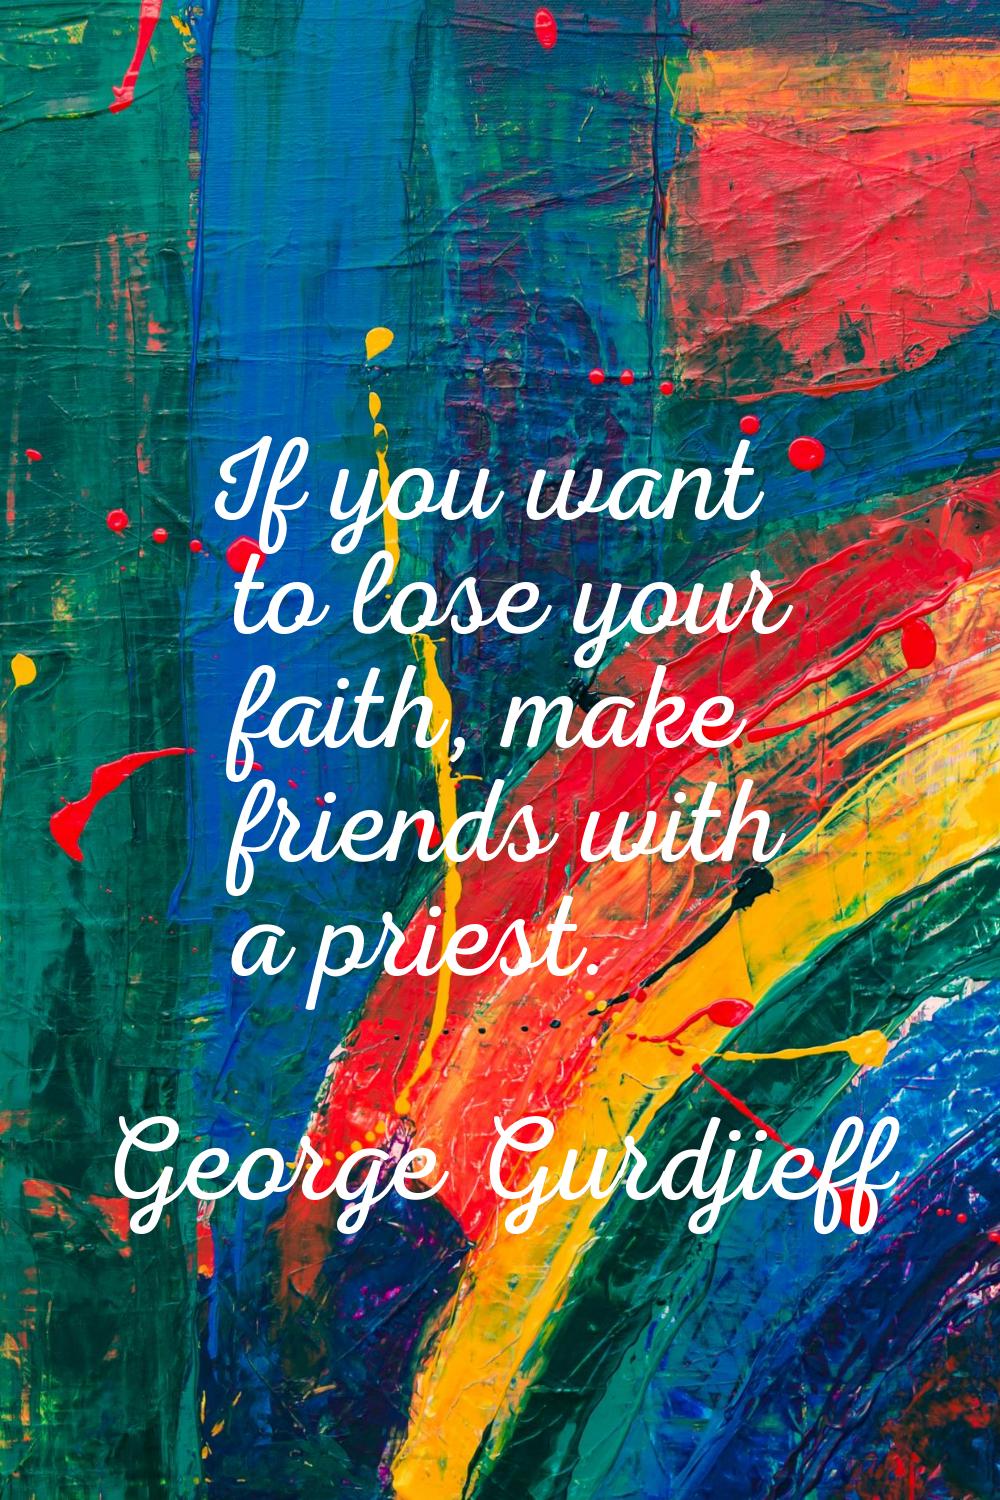 If you want to lose your faith, make friends with a priest.